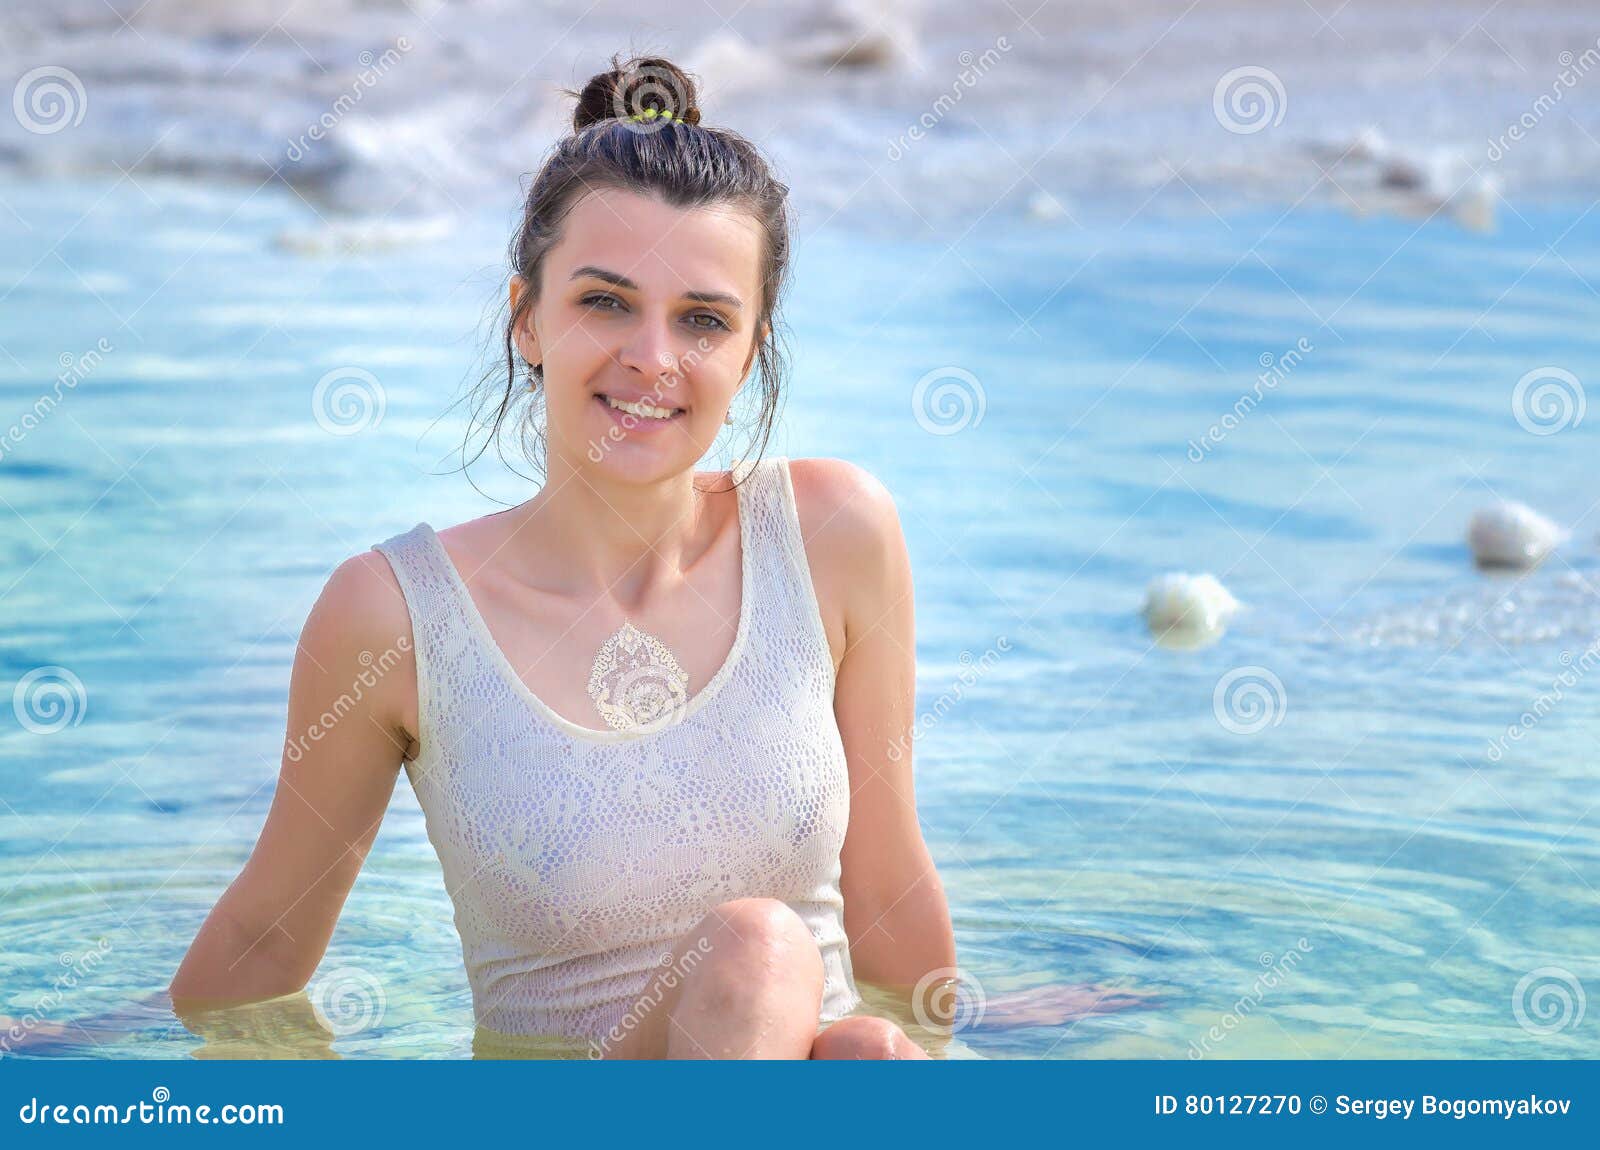 Attractive Girl Wears White Dress Sits in Water and Looks To